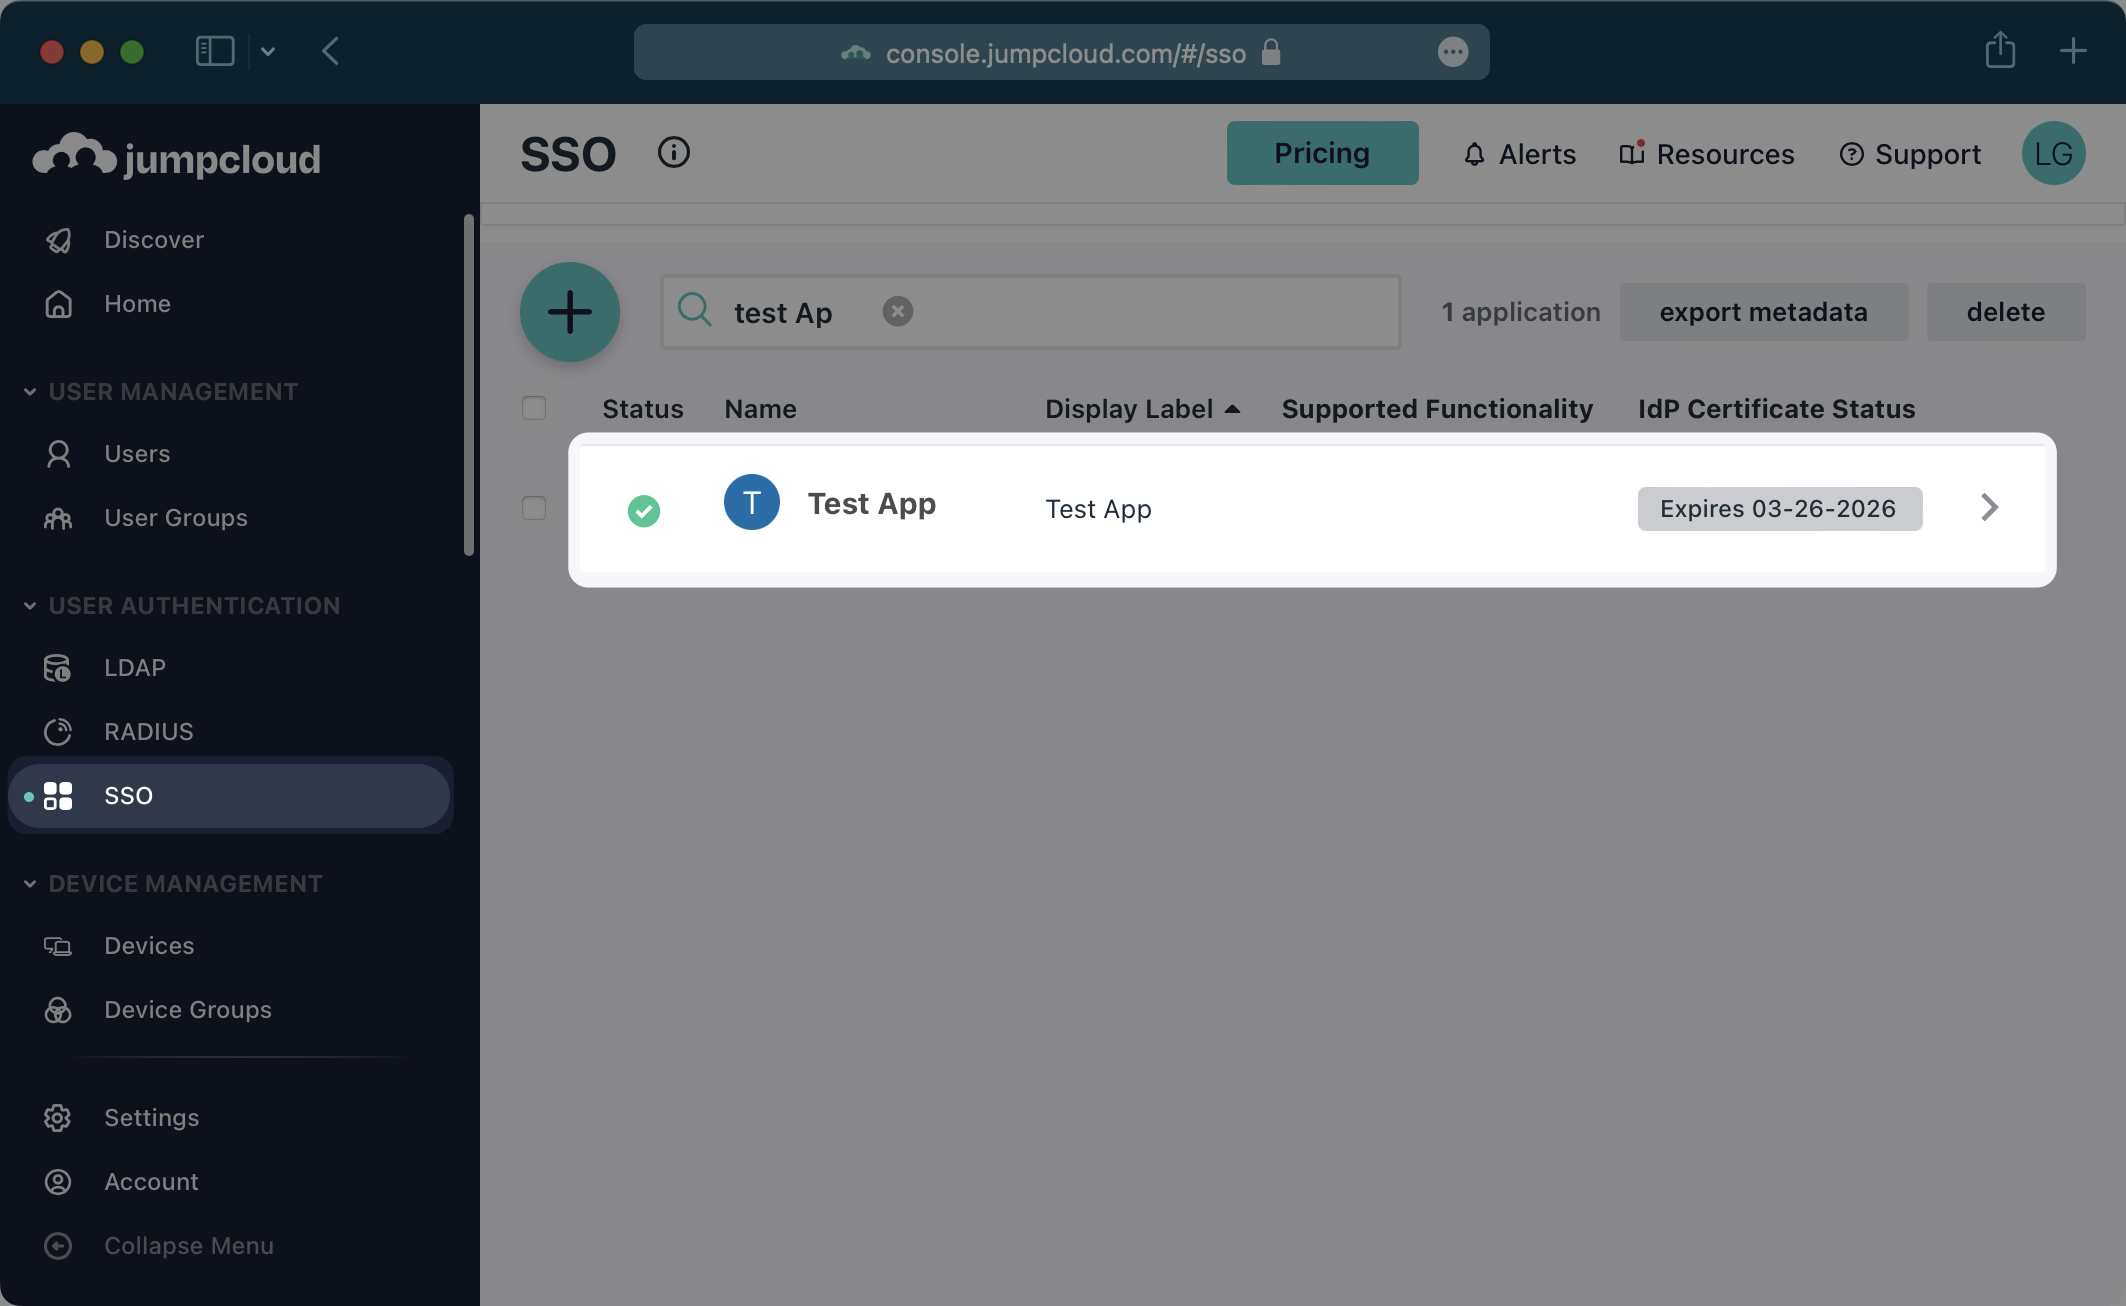 A screenshot highlighting the SSO tab and app selection in the JumpCloud dashboard.